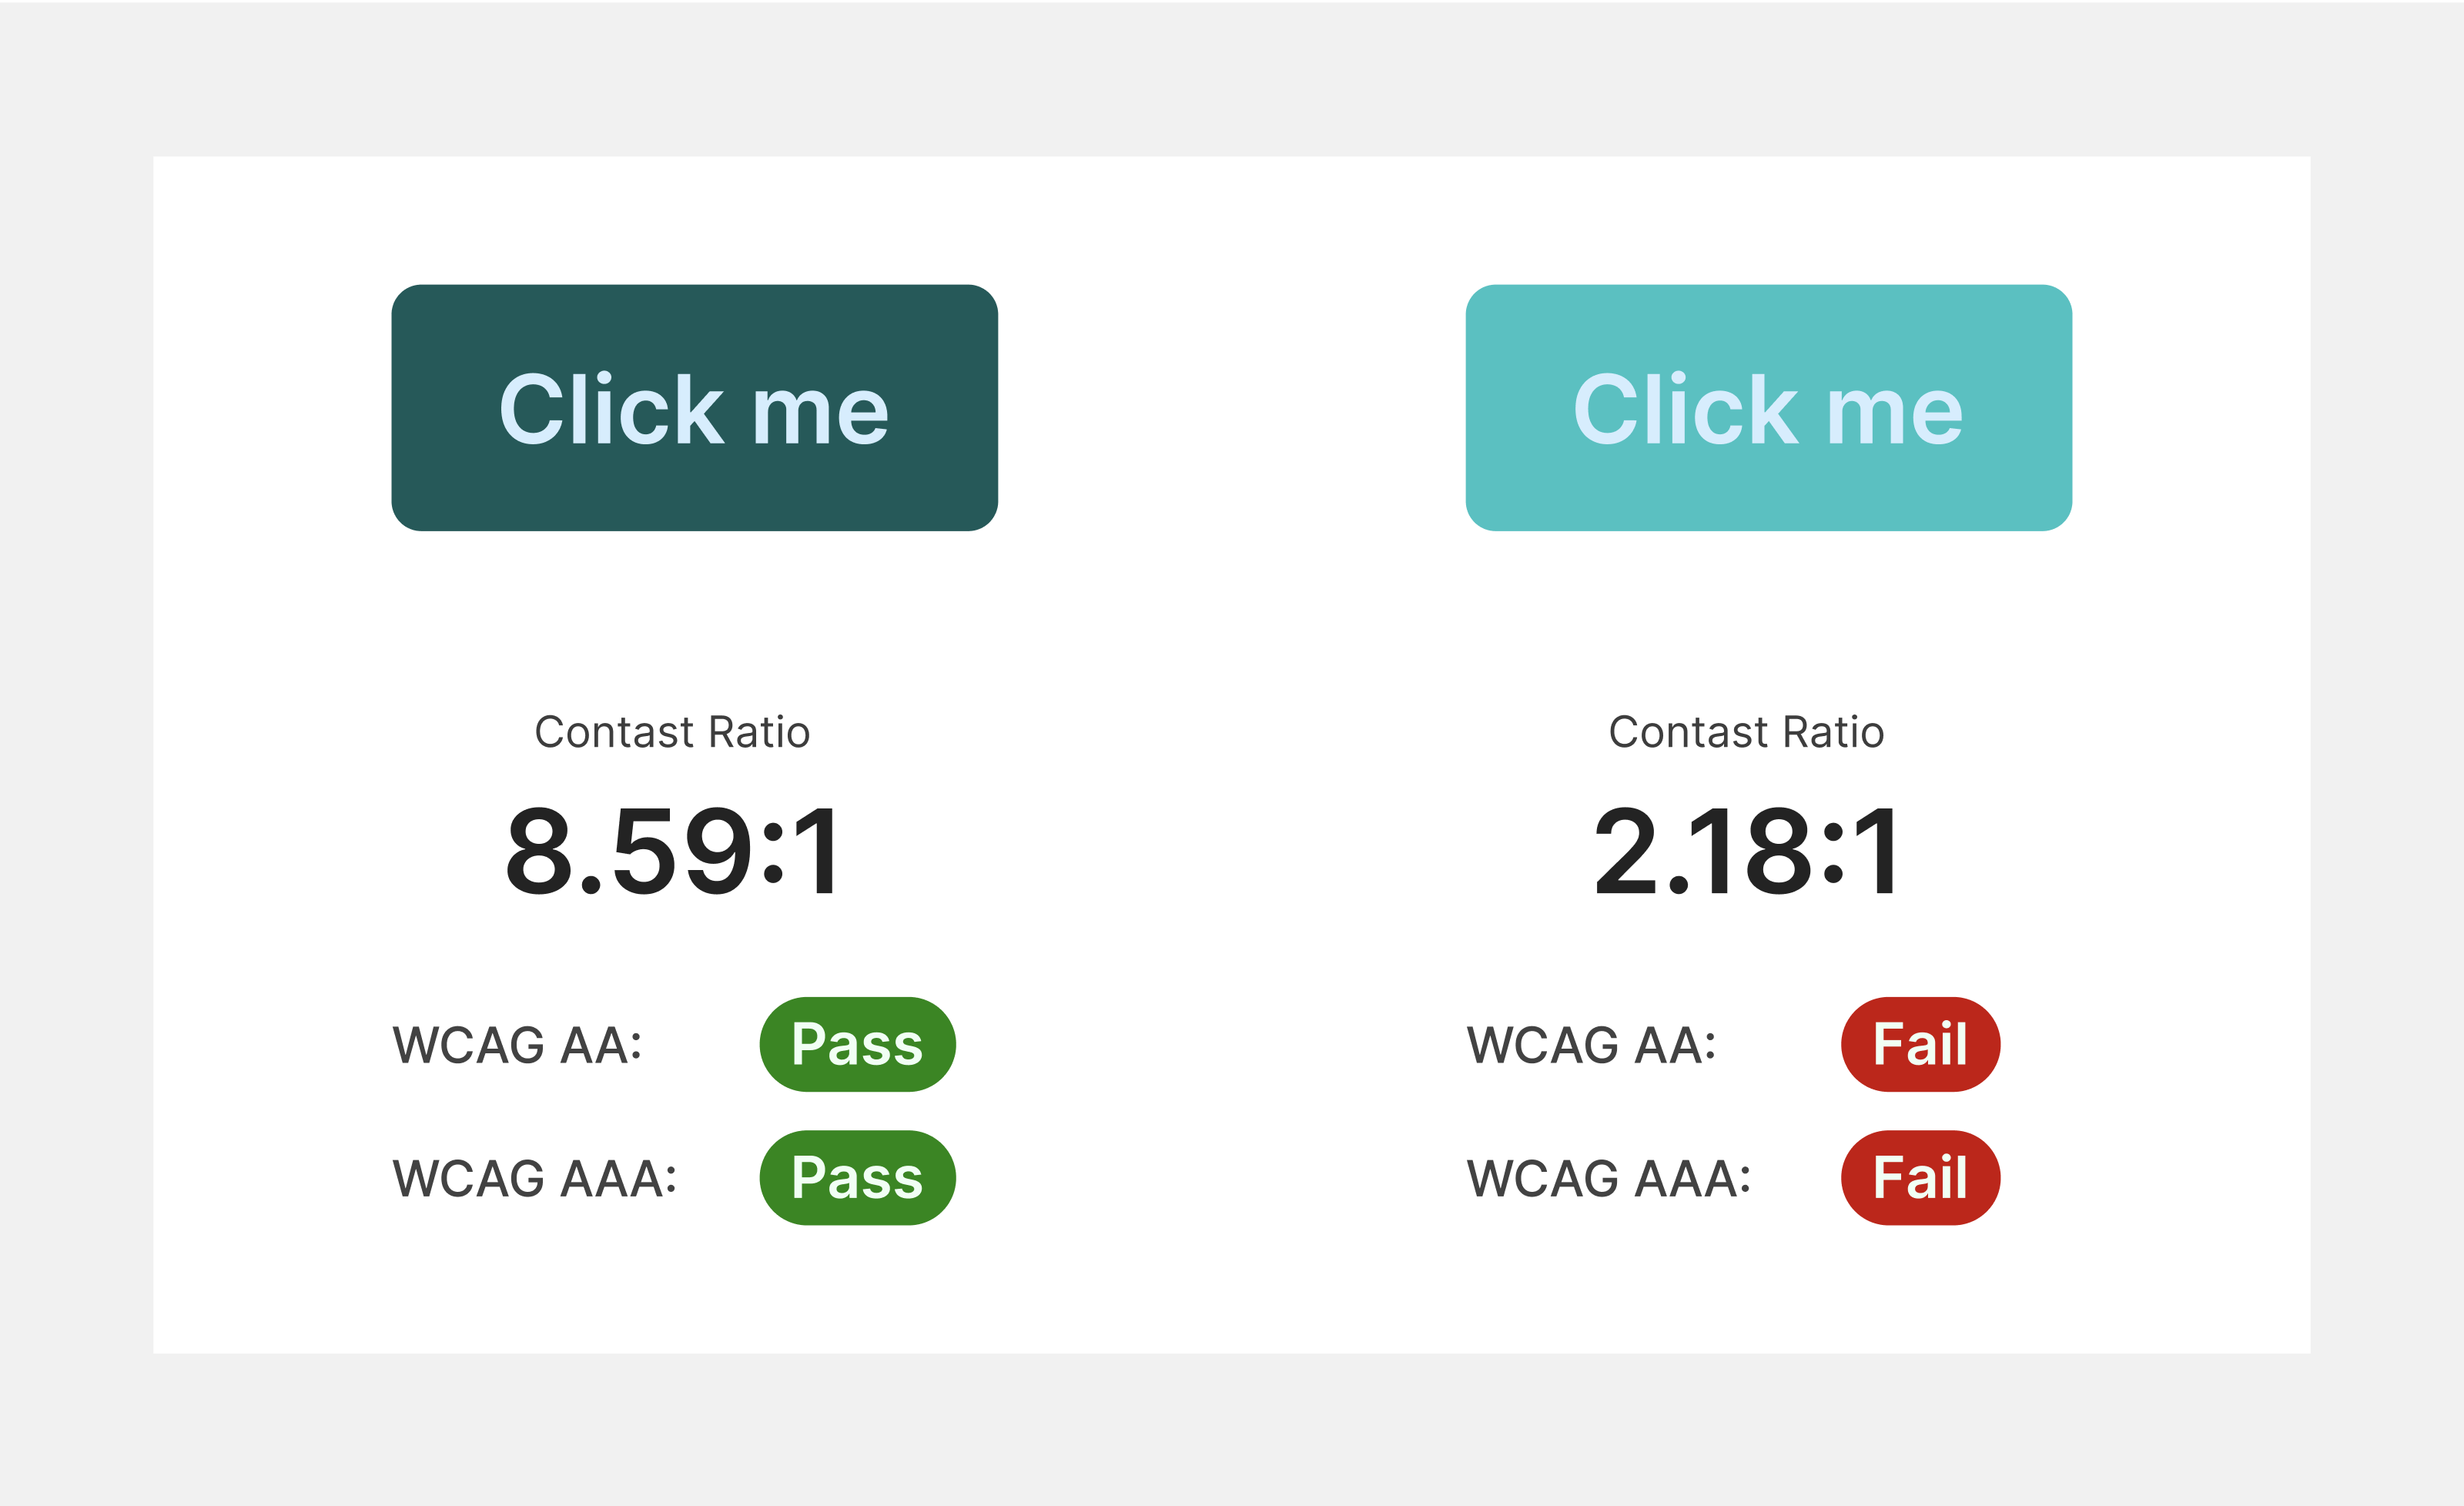 The image depicts two buttons side by side on a white background. The left button has the text 'Click me' and a dark green background. Below it, there is information about the contrast ratio, which is 8.59:1, and a designation 'Pass' for WCAG AA and AAA. The right button also has the text 'Click me' and is light turquoise in color. Below it, there is information about the contrast ratio, which is 2.18:1, and a designation 'Fail' for WCAG AA and AAA.